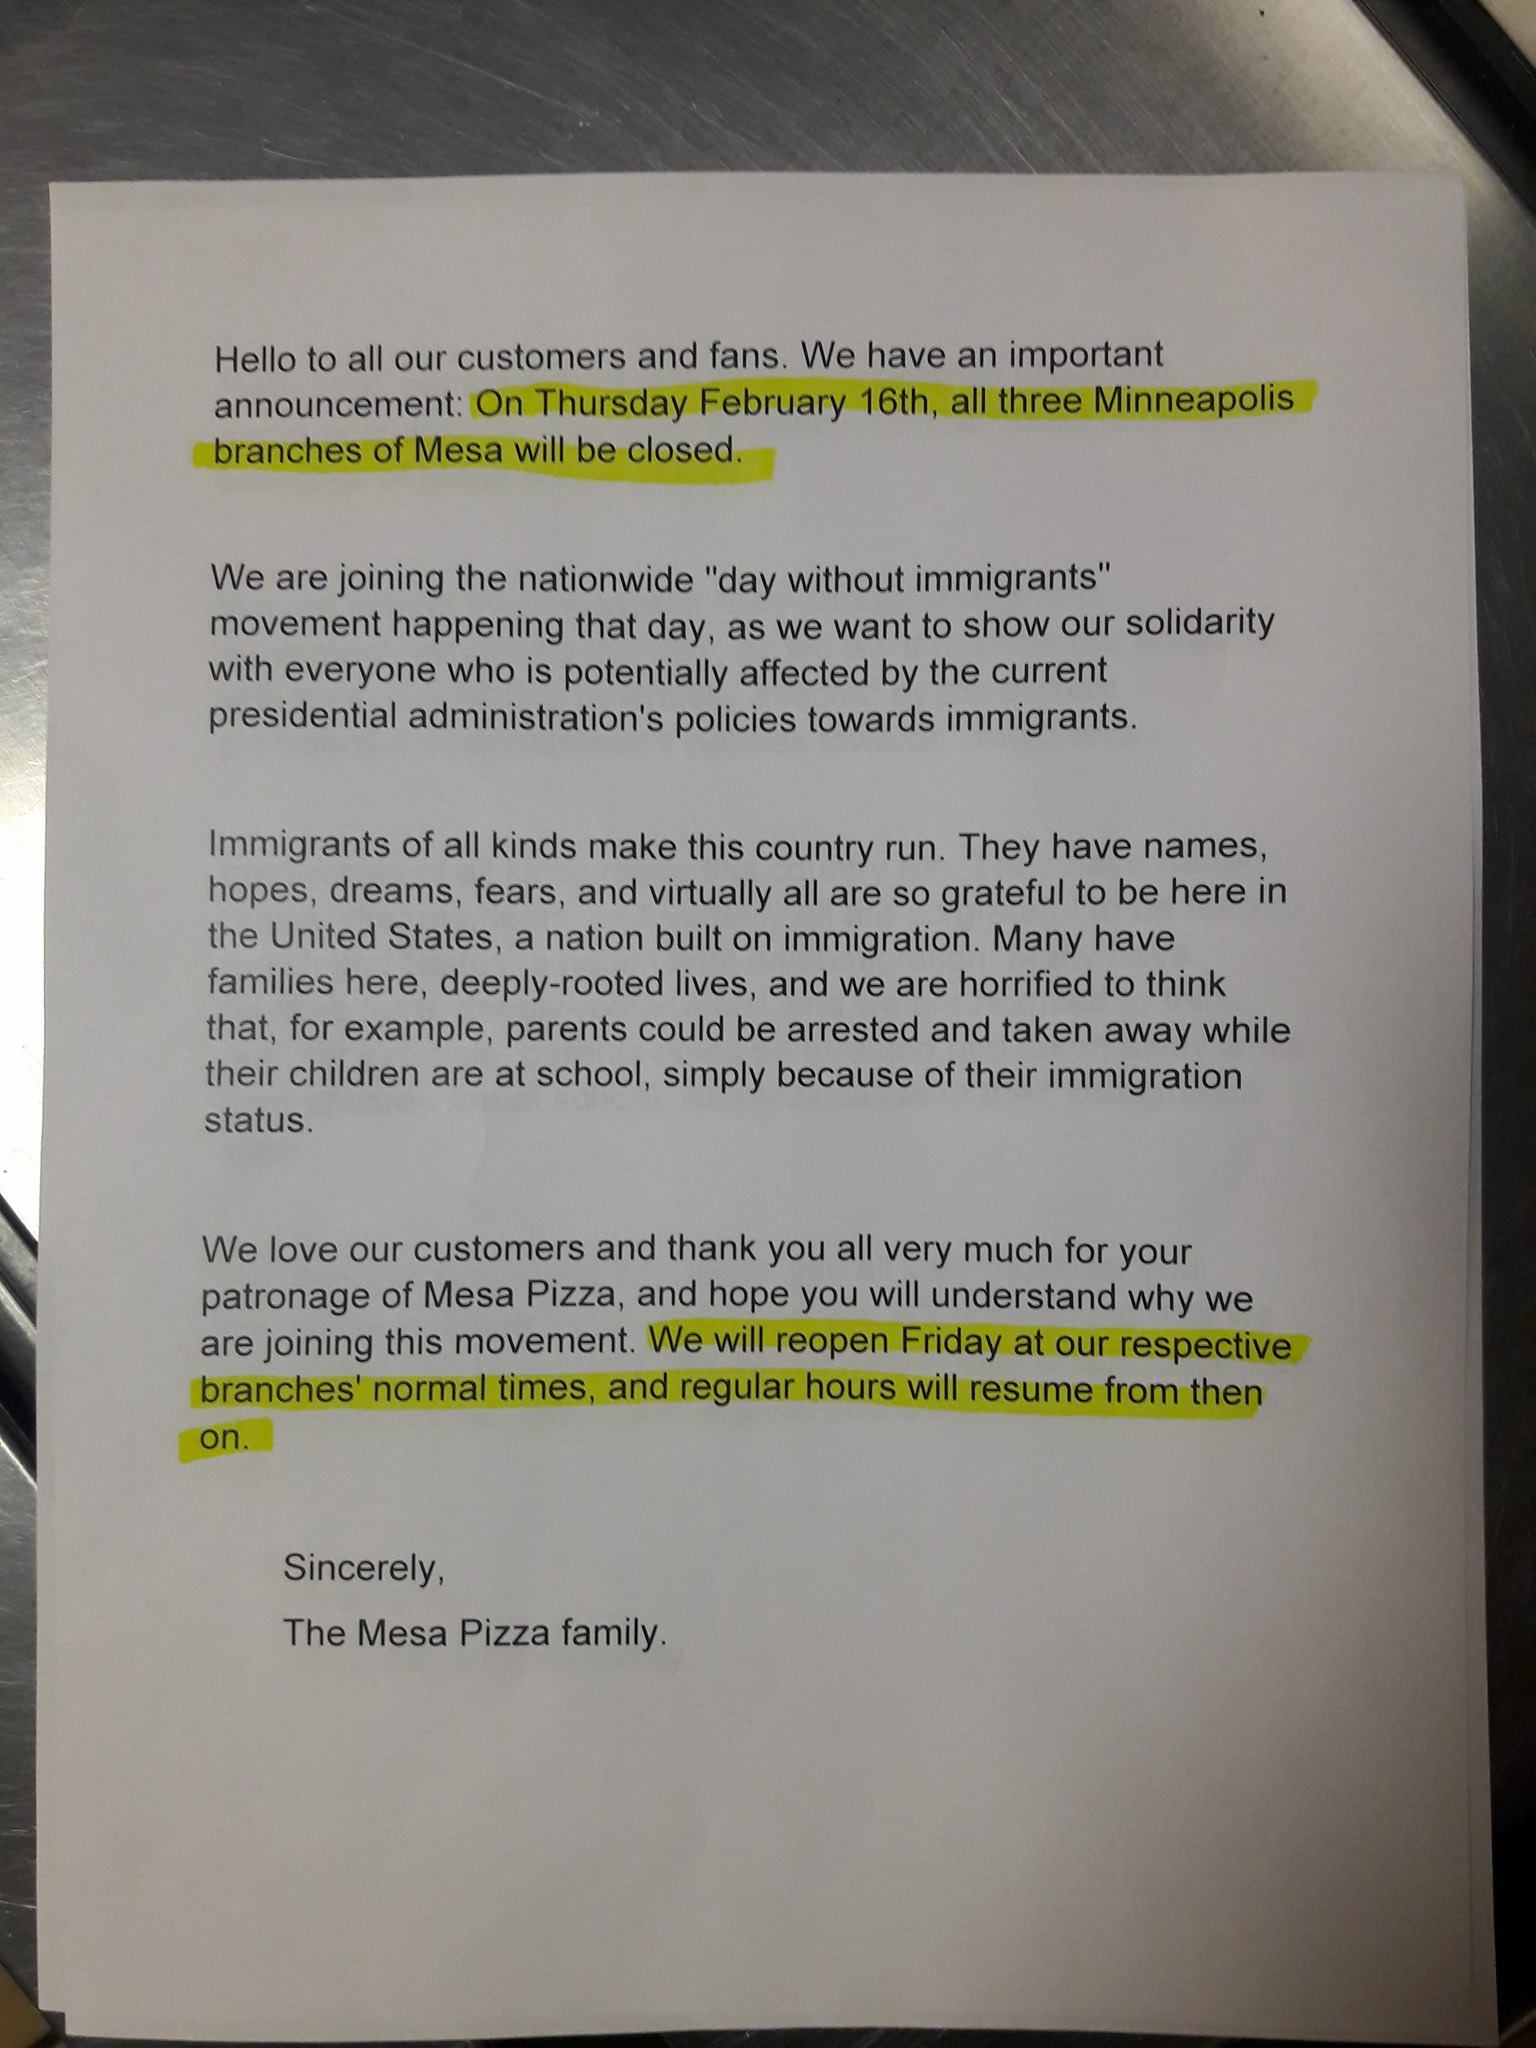 Notice to customers posted by Mesa Pizza.